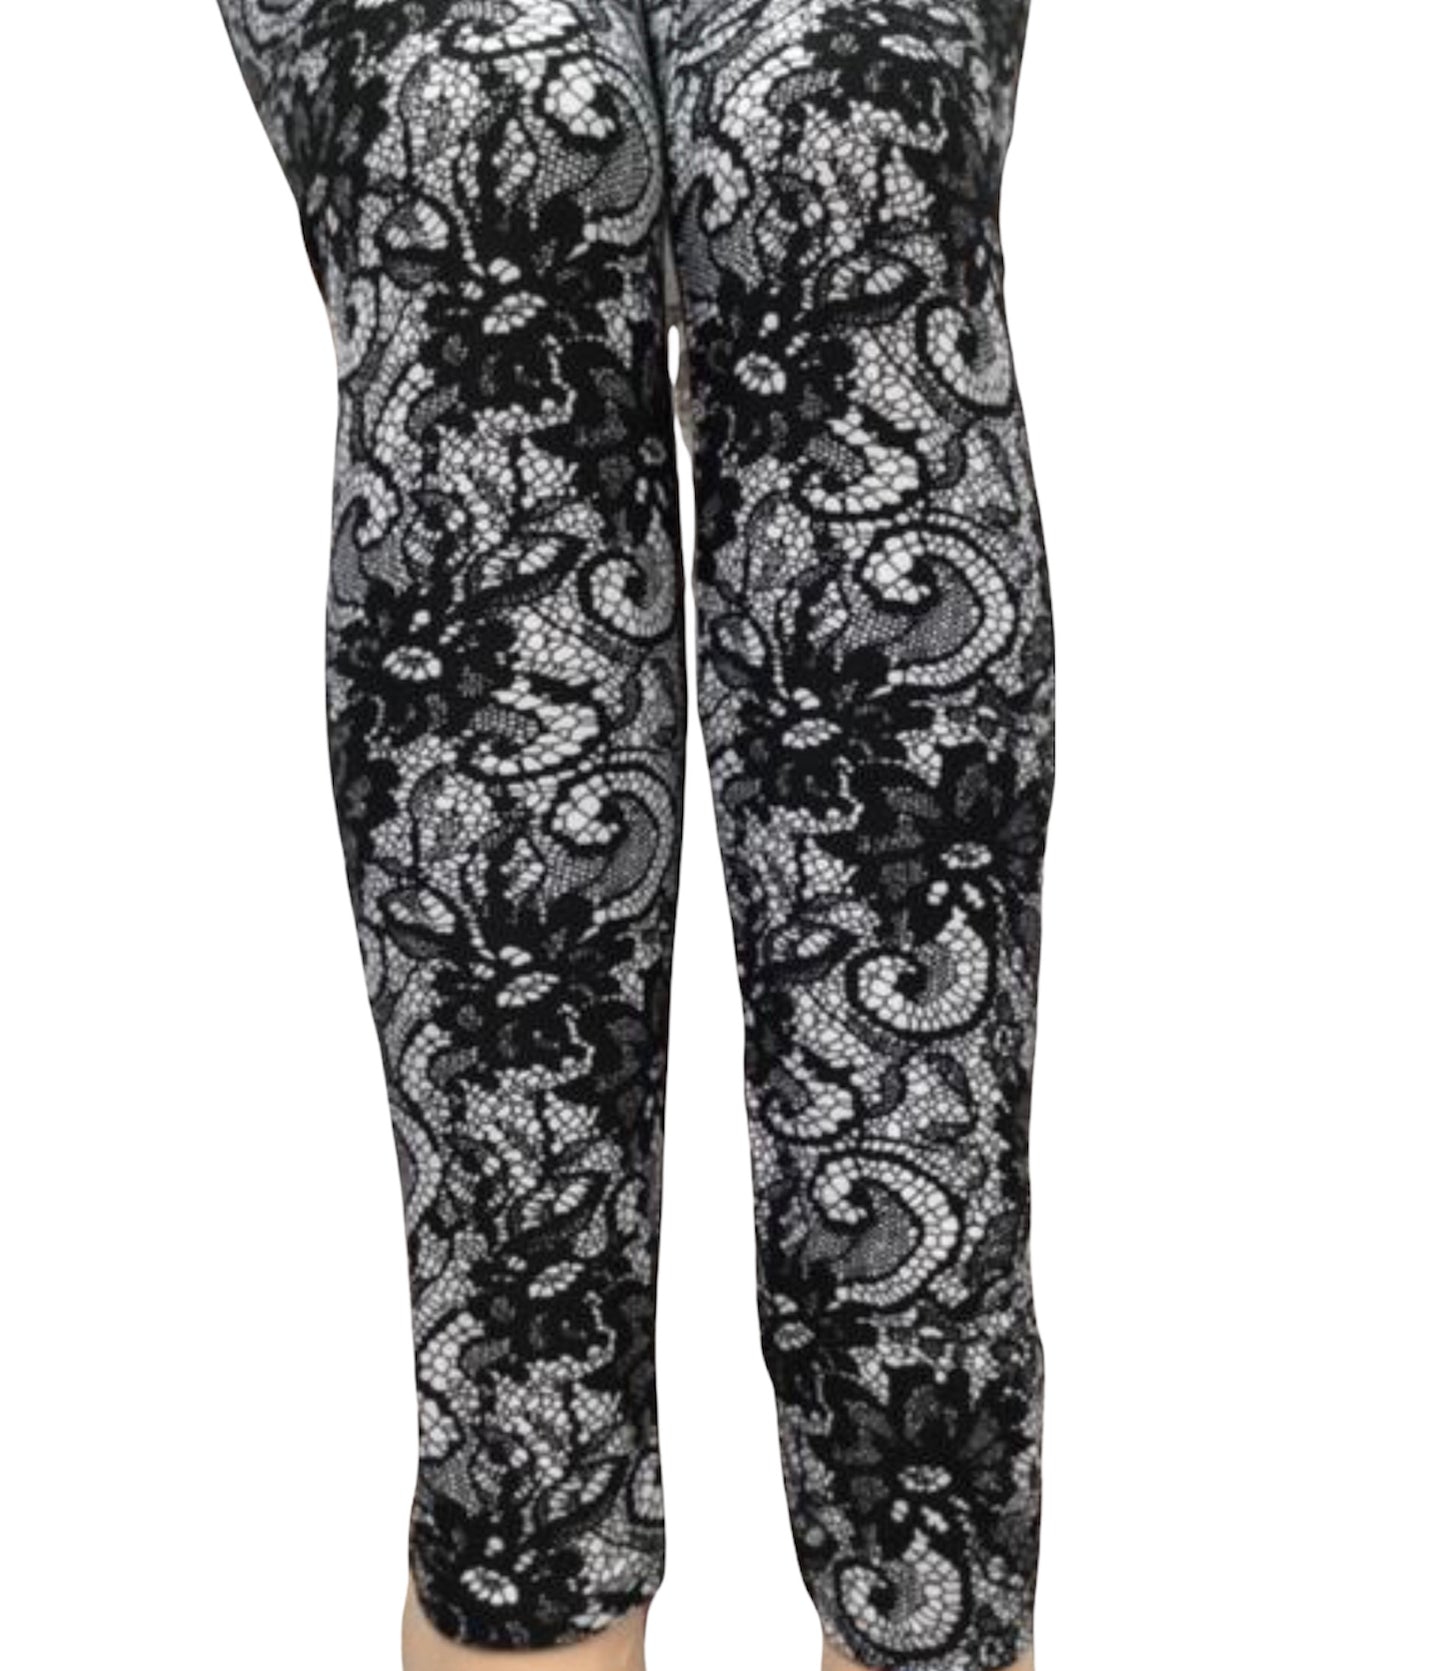 Lace It Up Printed Leggings